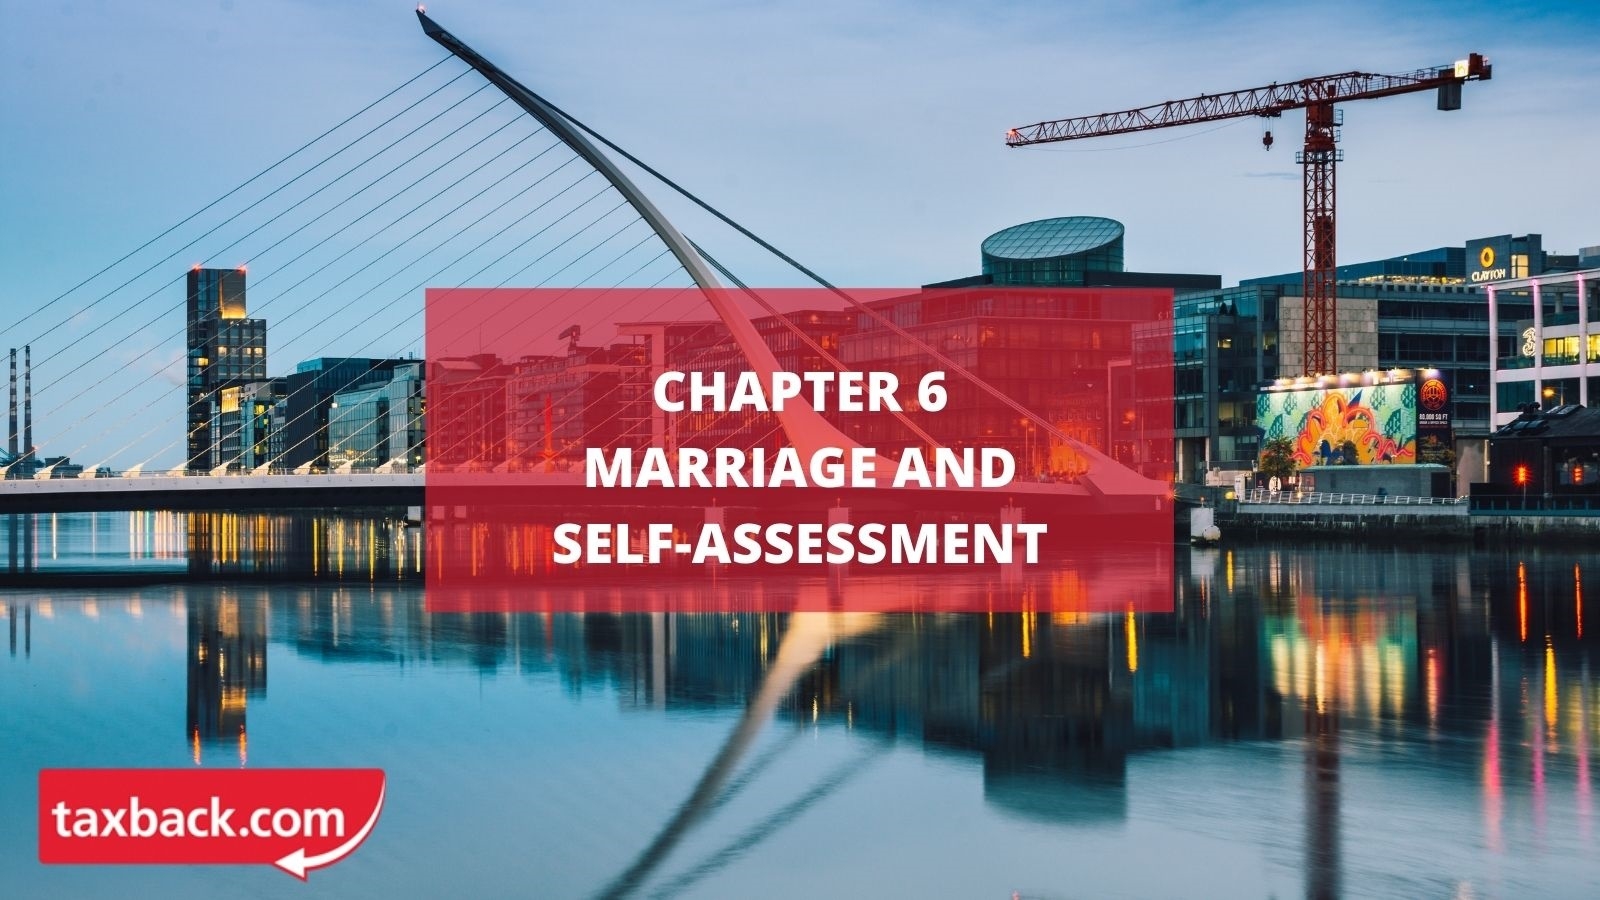 Chapter 6 - Marriage and self-assessment